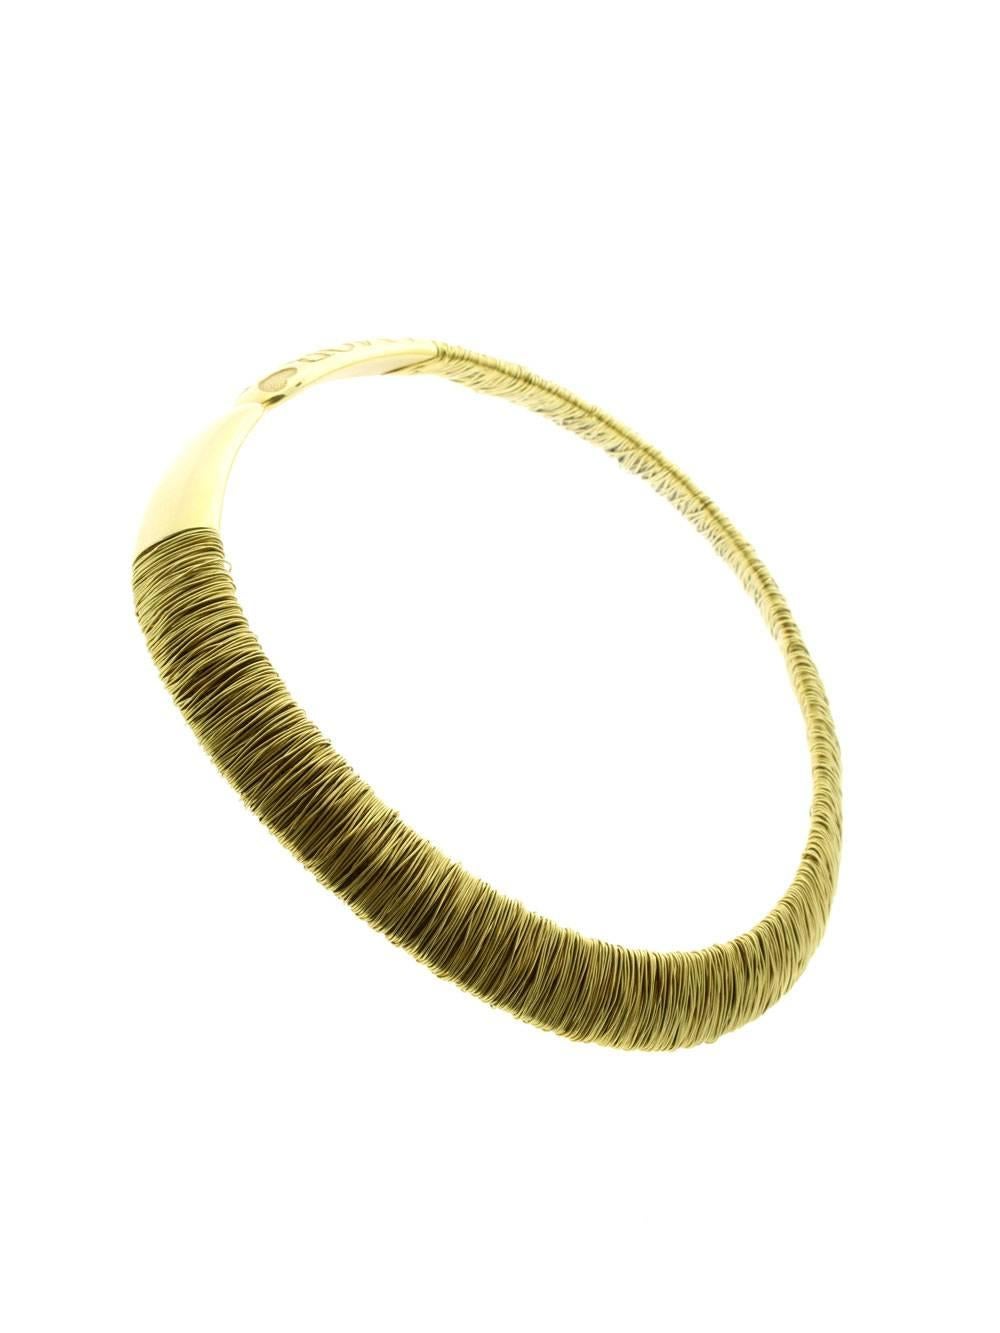 A magnificent Pasquale Bruni choker crafted in 18k yellow gold featuring a flawless marriage of classic design and modern elements. Weight: 117.5 Grams Measurements: The necklace measures .59″ inches wide Necklace Length: 15.5″

This magnificent